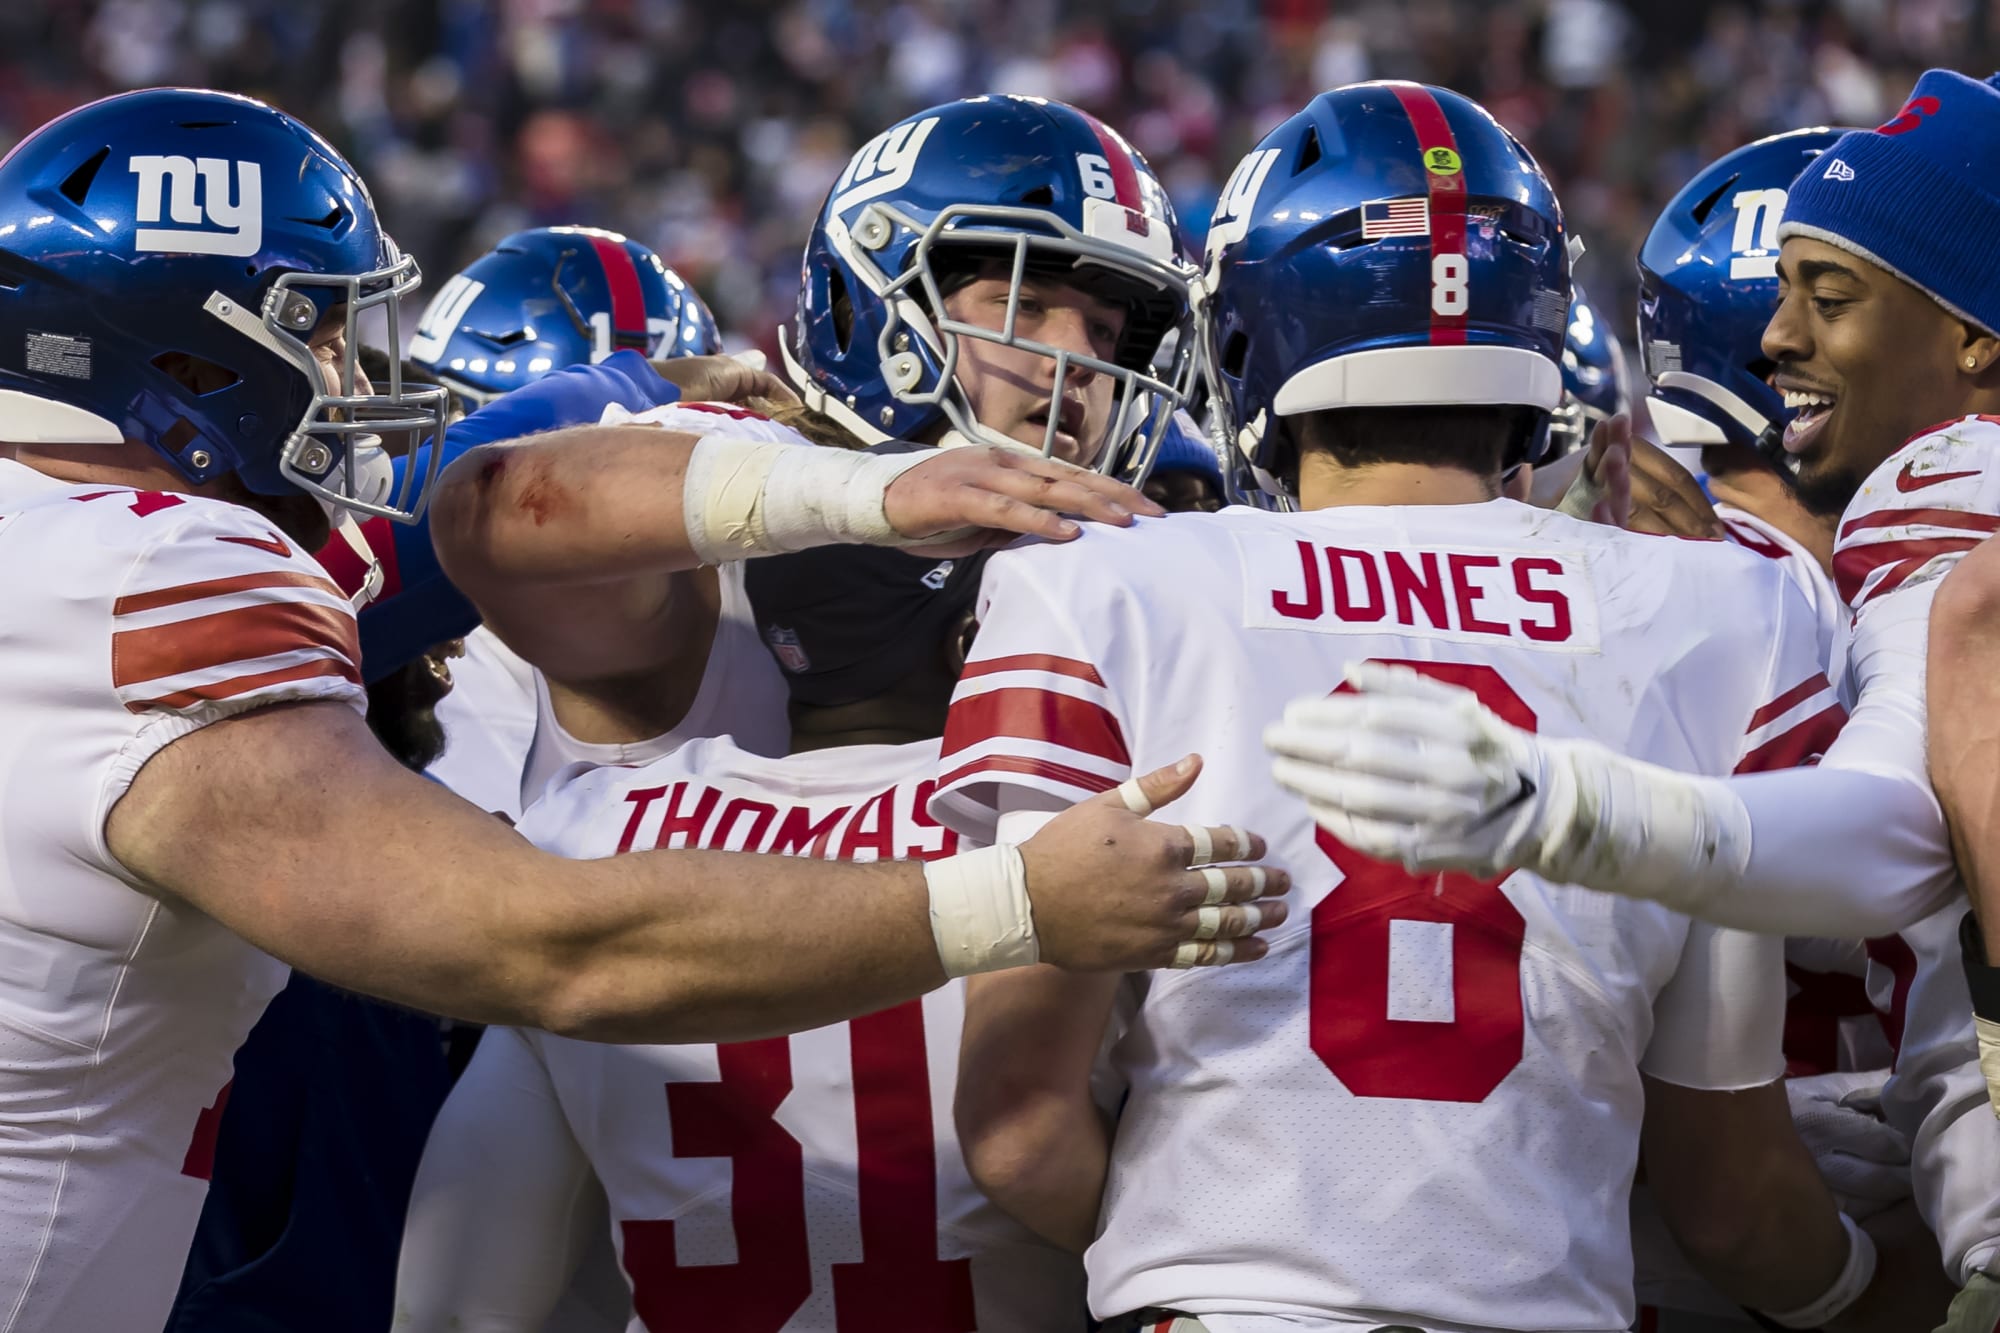 5 realistic free agent signings to make NY Giants contenders in 2020